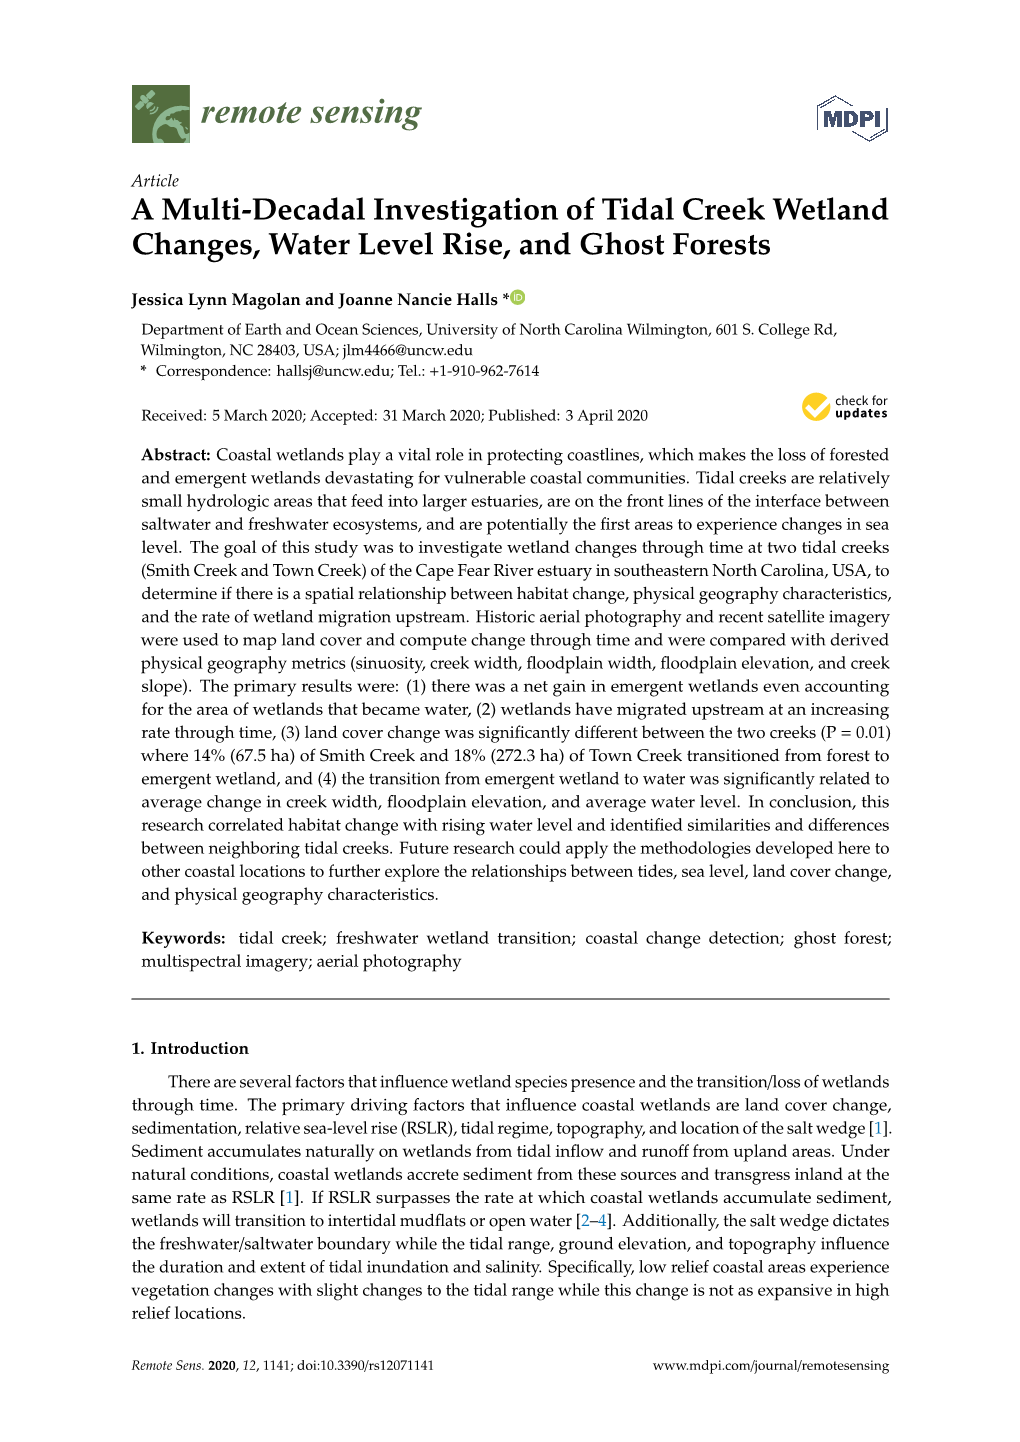 A Multi-Decadal Investigation of Tidal Creek Wetland Changes, Water Level Rise, and Ghost Forests